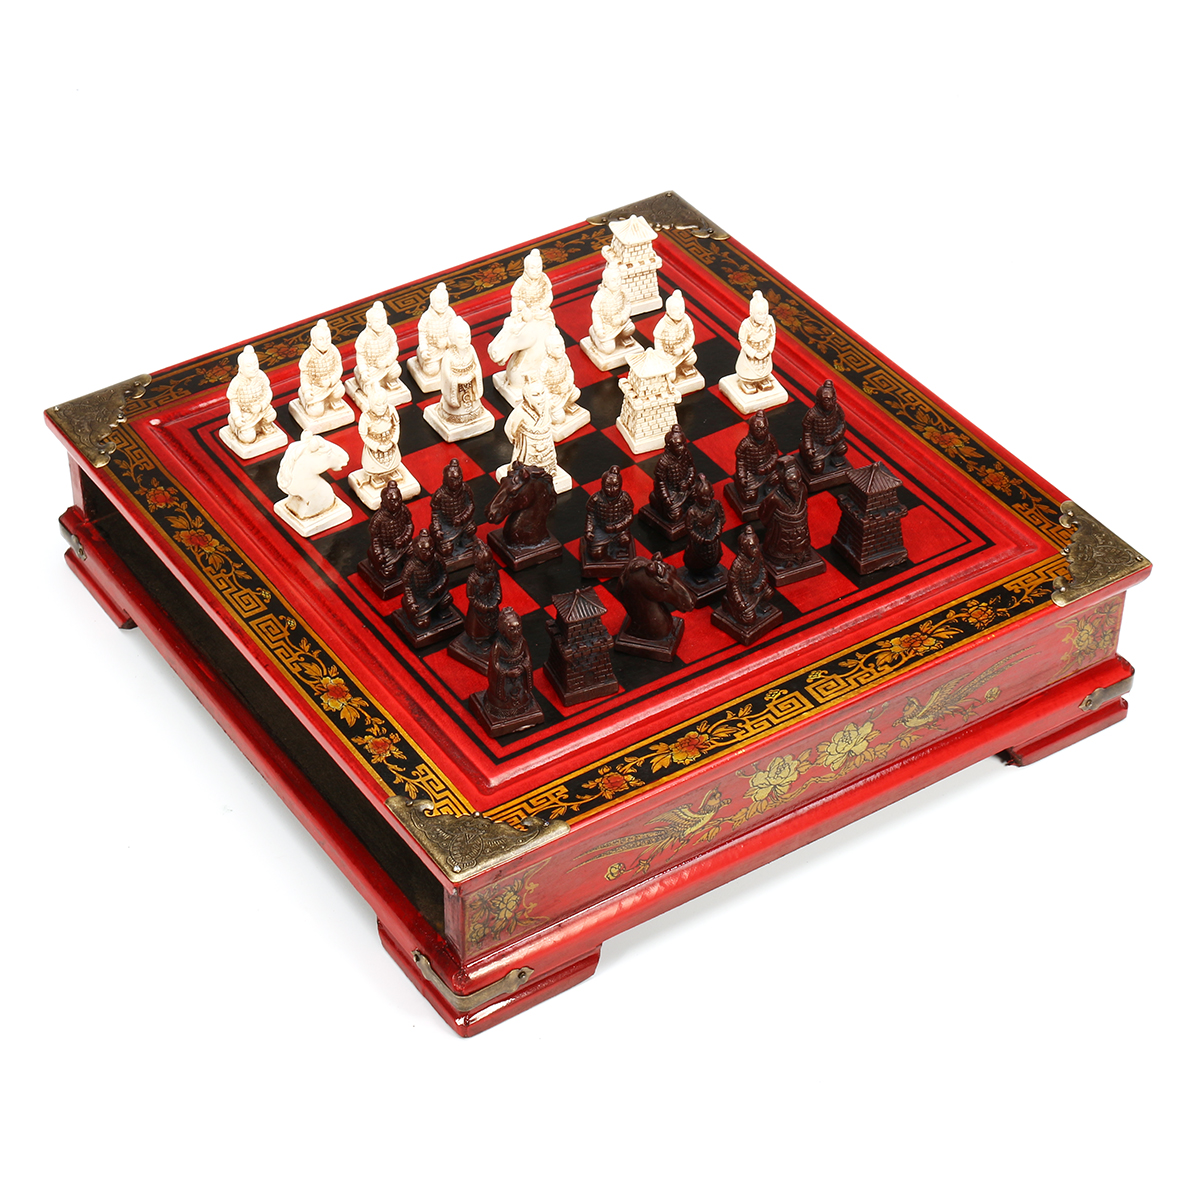 

Vintage Wooden Chinese Chess Board Table Game Set Pieces Gift Toy Collectibles